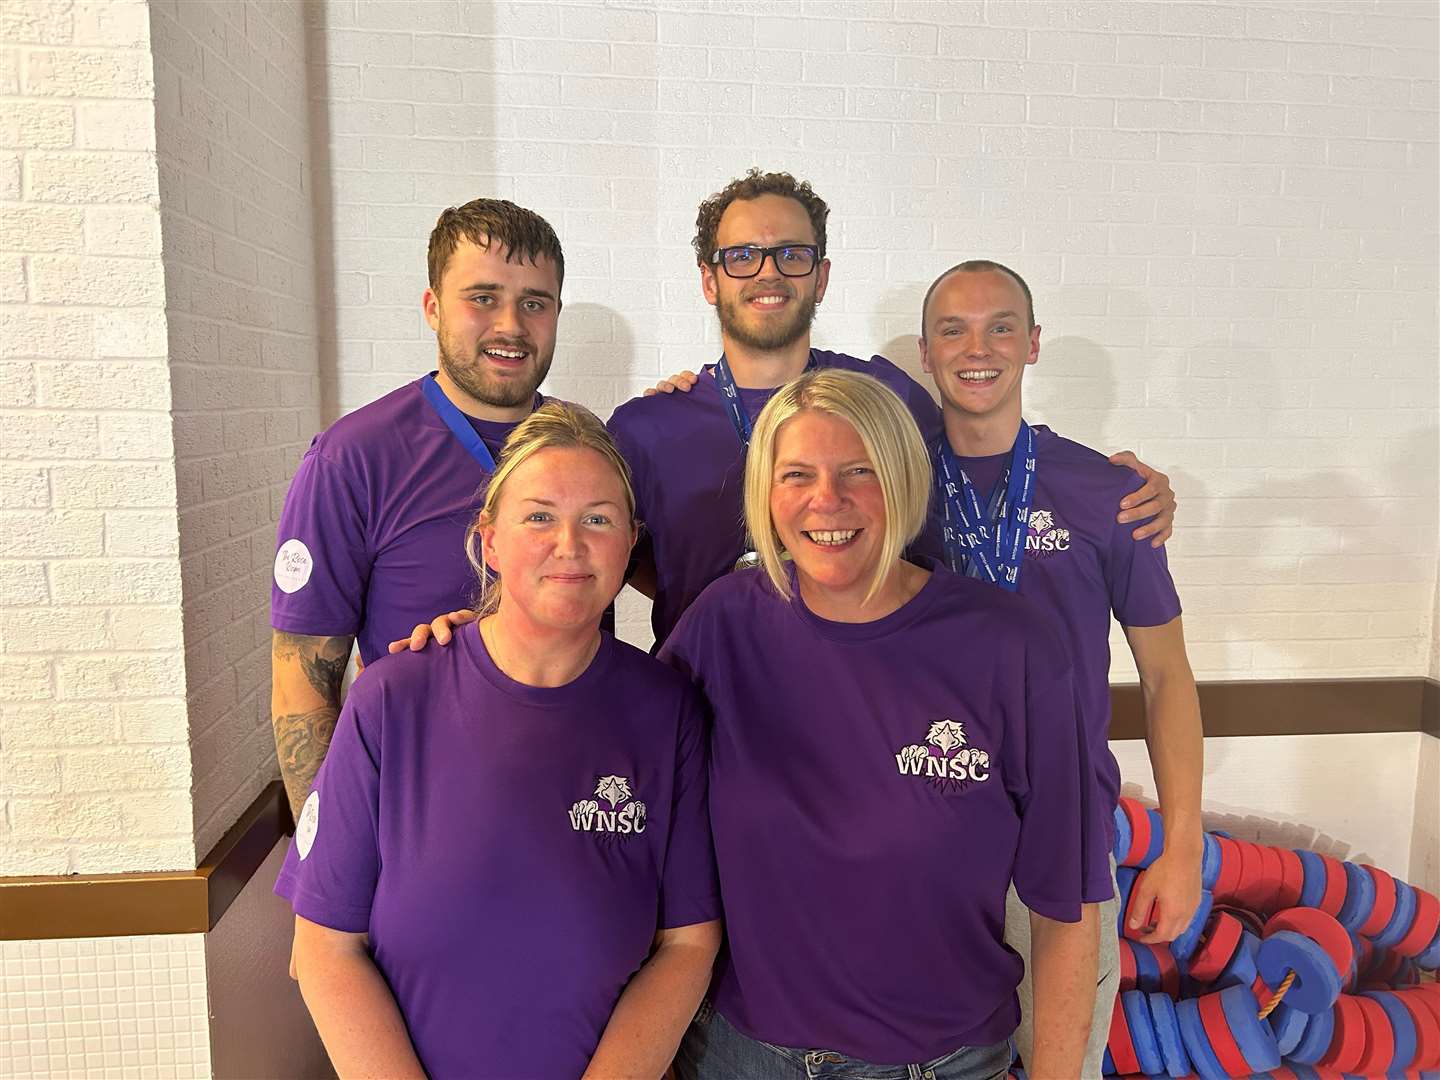 West Norfolk masters swimmers. Pictured back, from left, are: Jake Lammas; Oliver Kenny and Finlay Ryan. Front: Lucy Chadderton and Tracey Dodds.